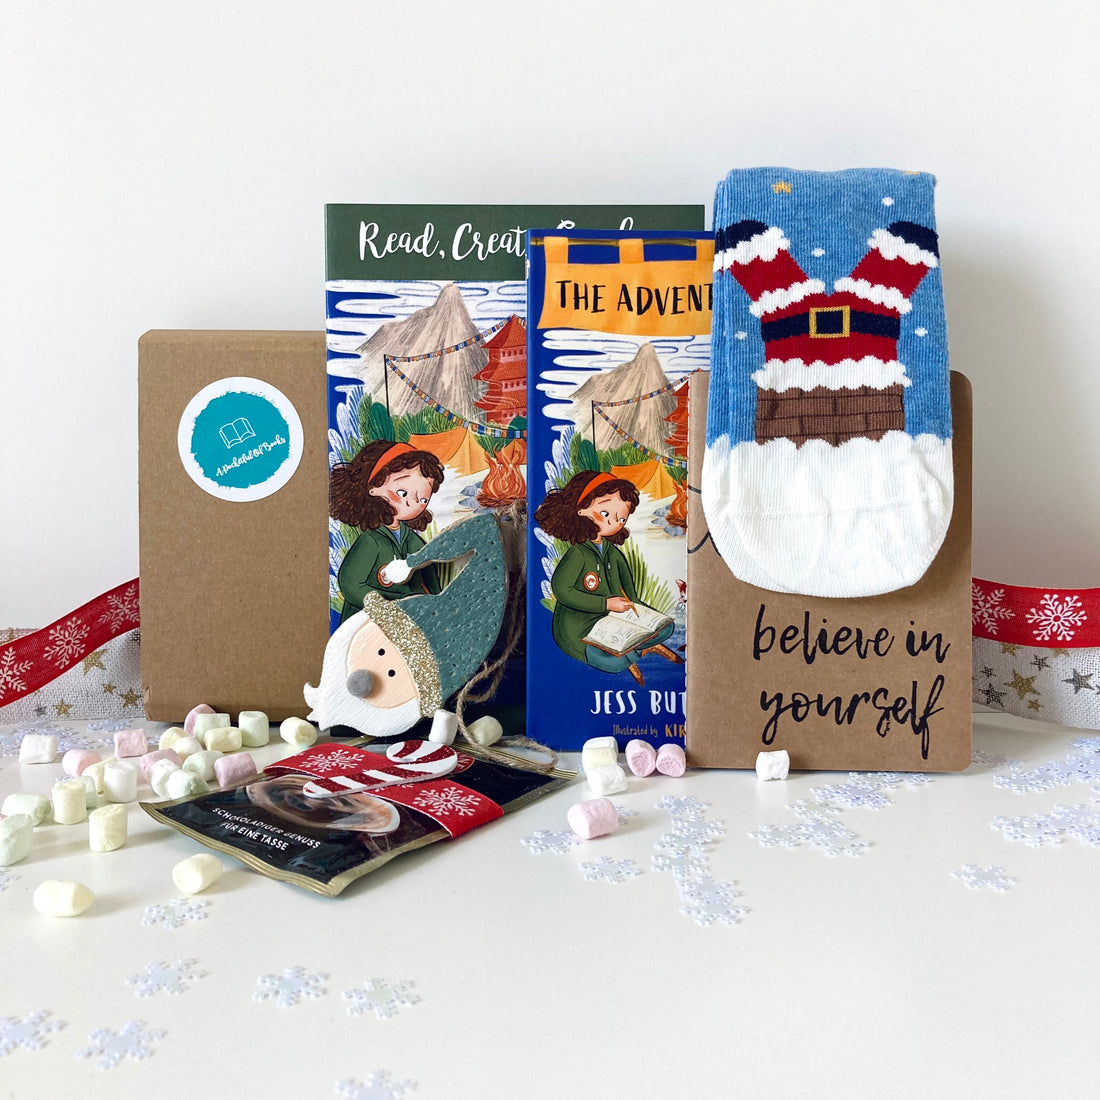 Festive Gifts and Postage Dates